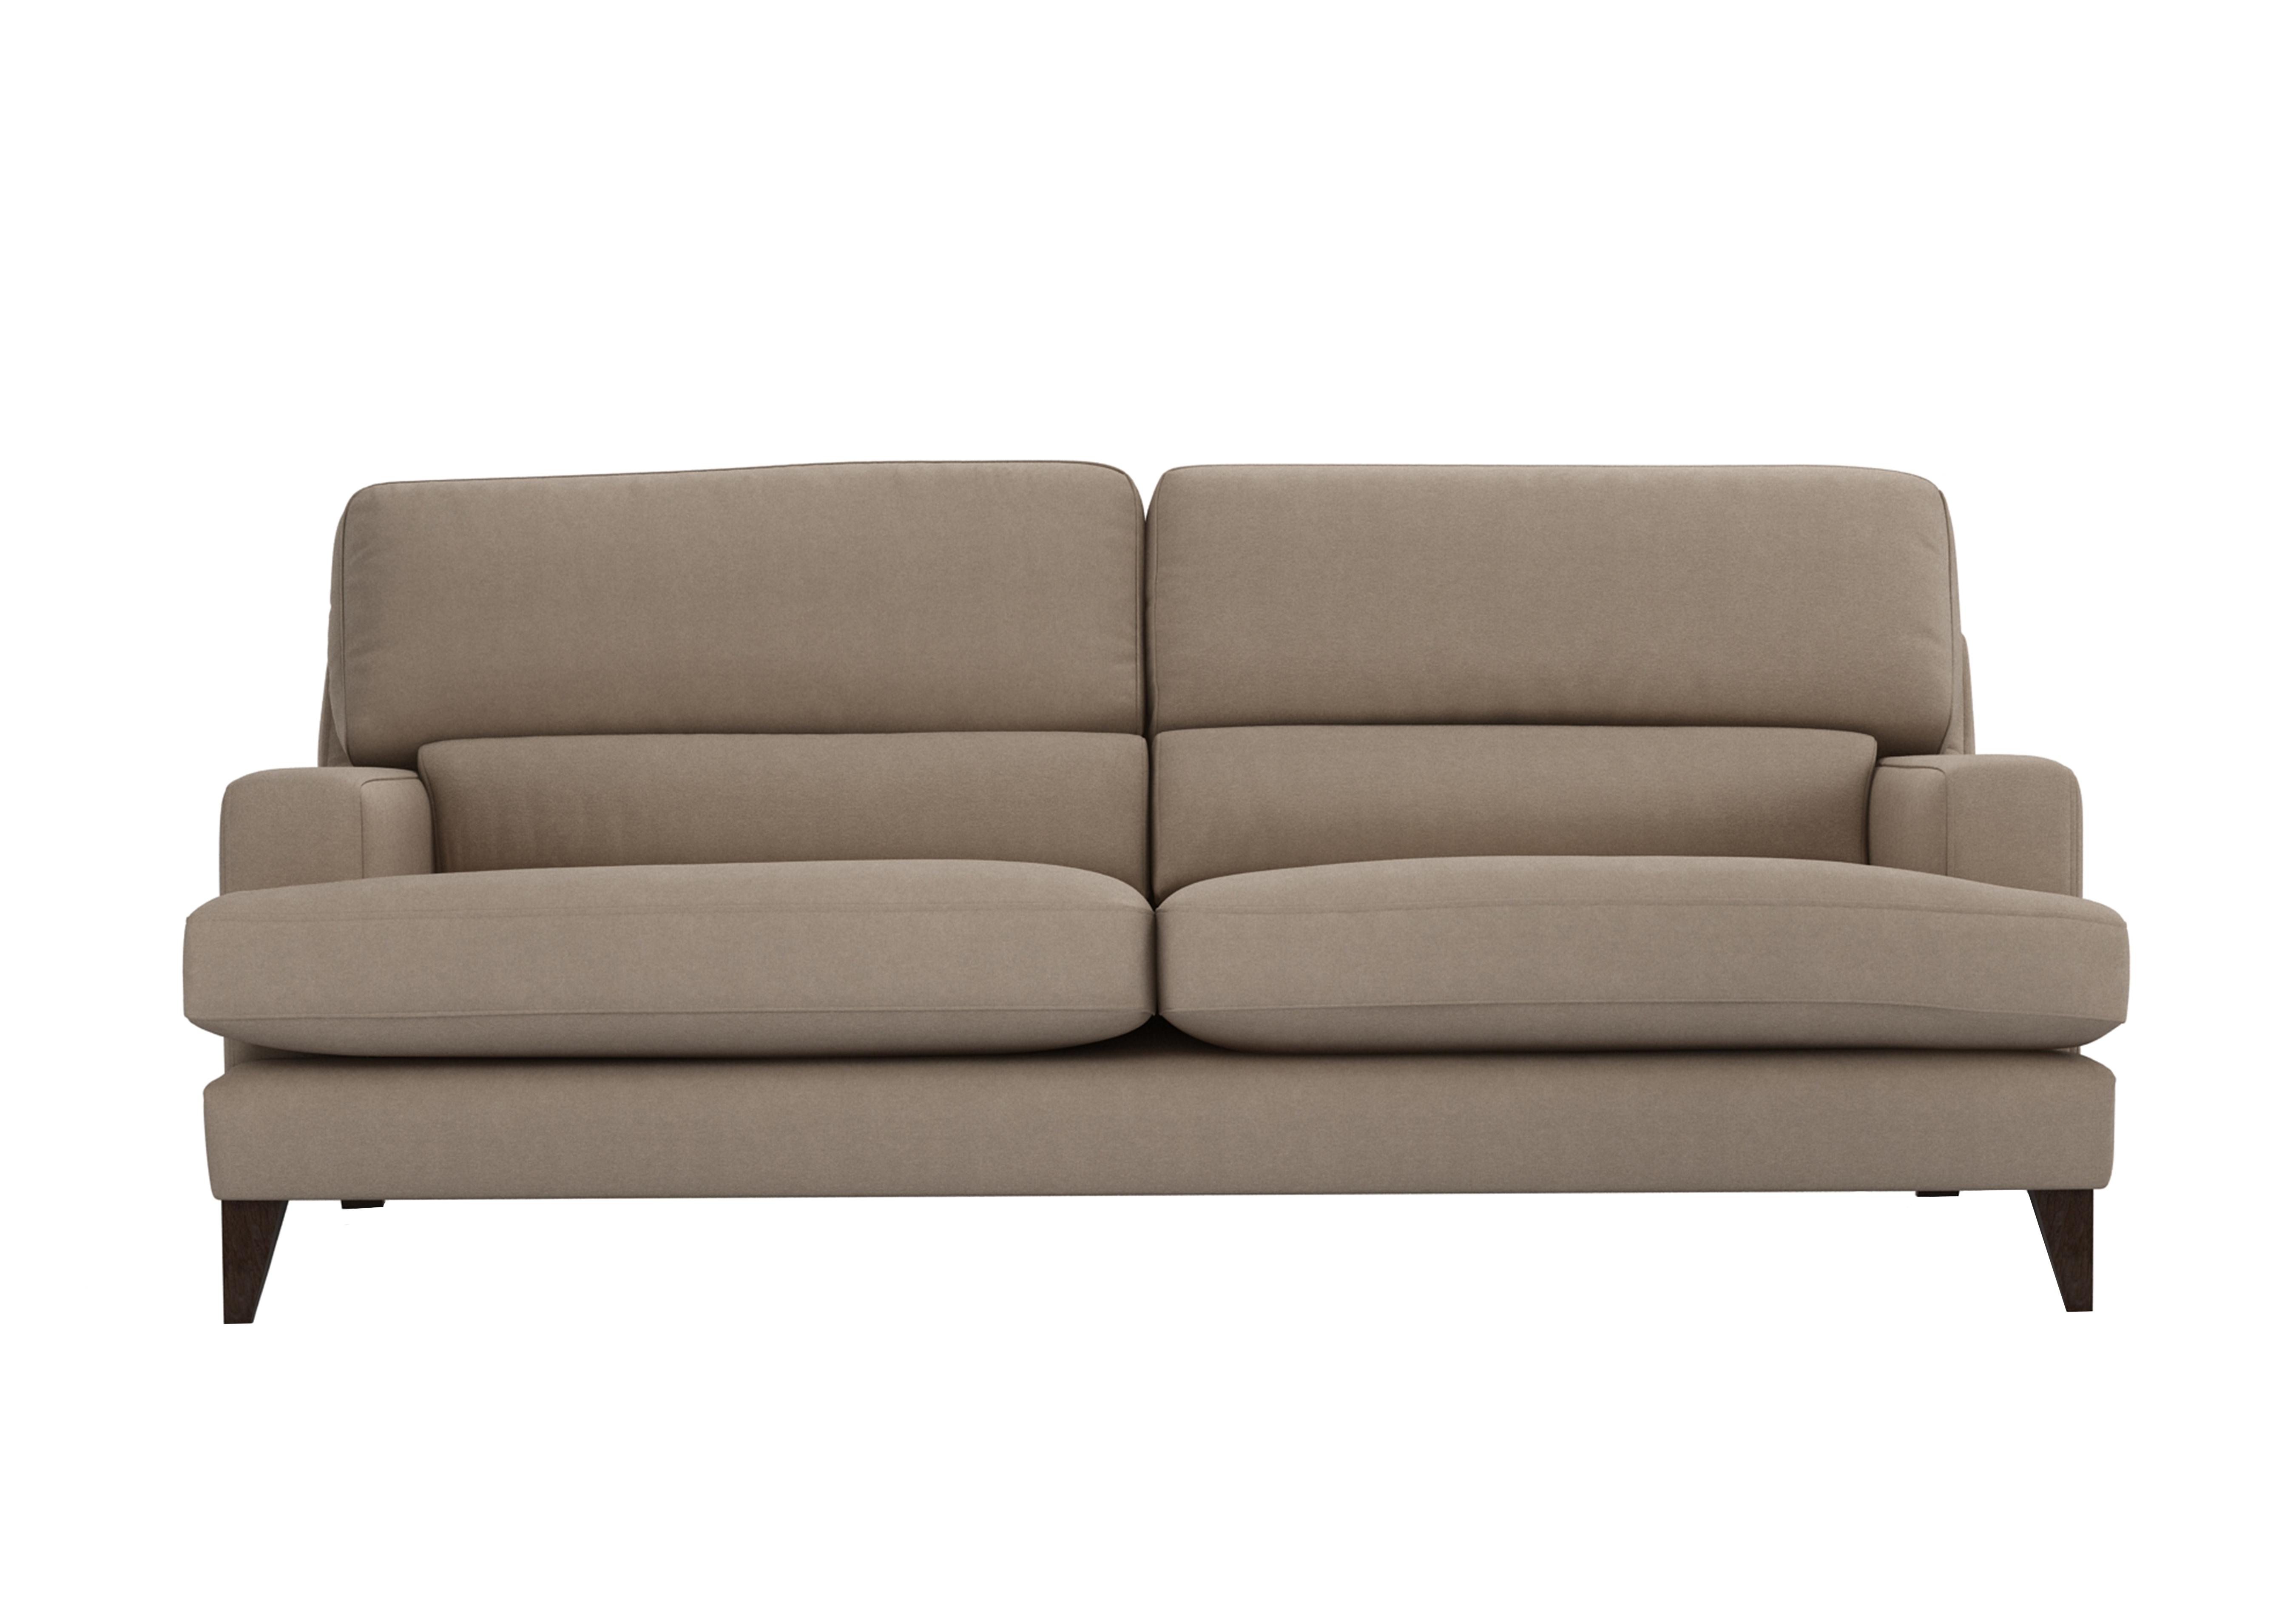 Romilly 4 Seater Fabric Sofa in Bra223 Brandy Butter Wa Ft on Furniture Village